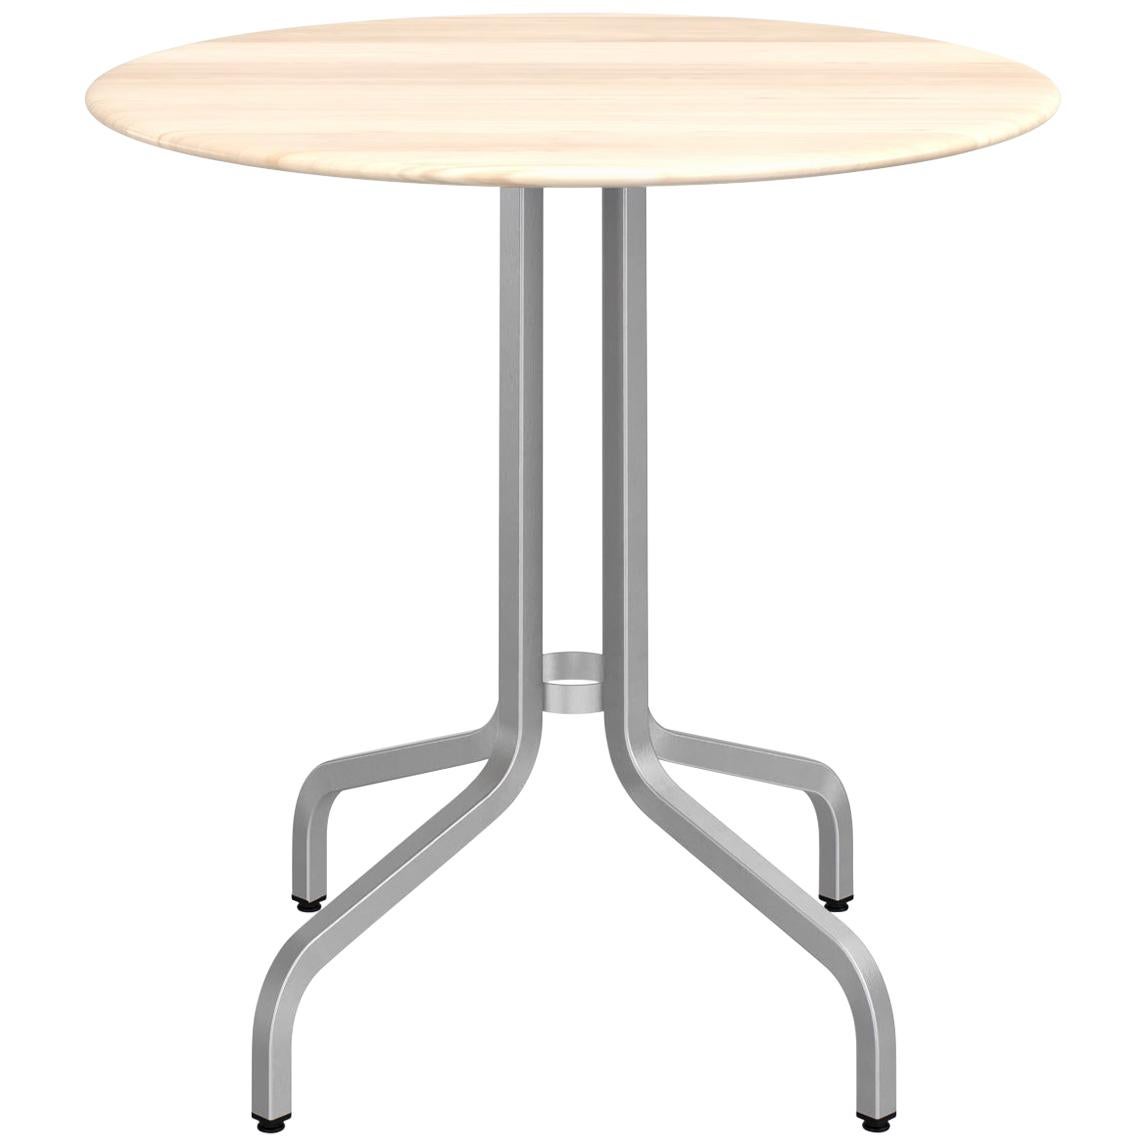 Emeco 1 Inch Medium Round Aluminum Cafe Table with Wood Top by Jasper Morrison For Sale